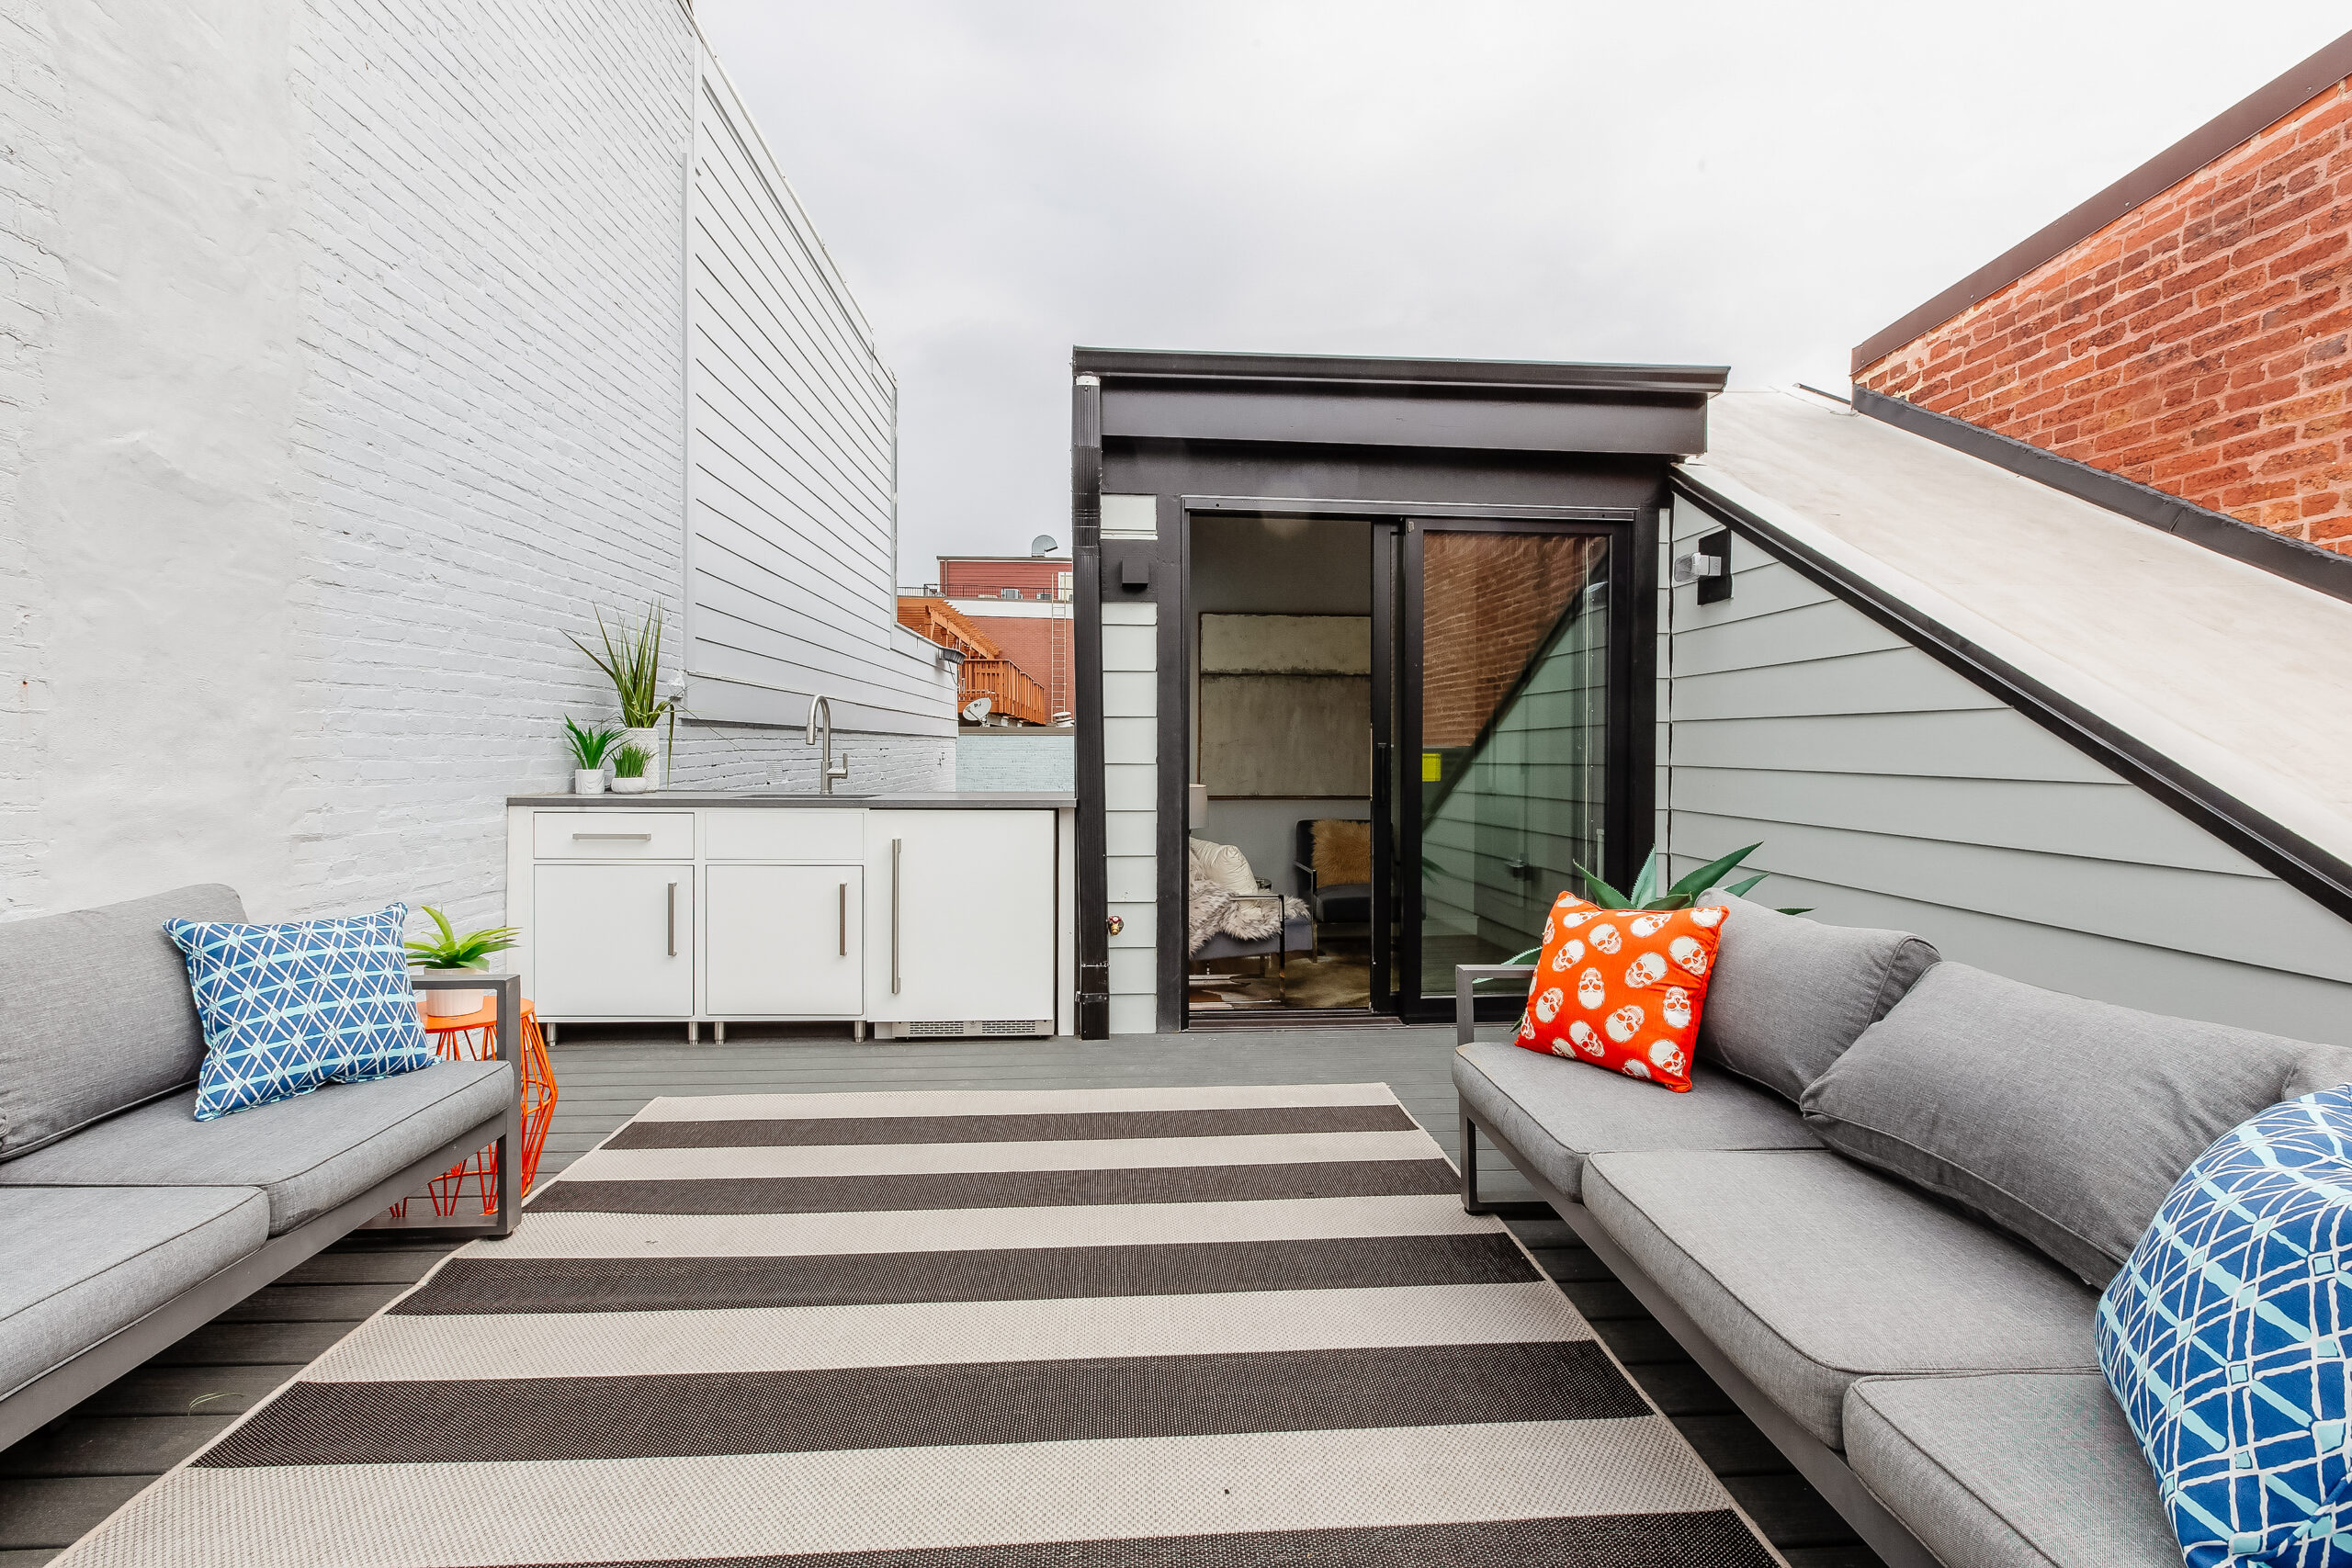 Rooftop terrace with two outdoor couches and a wet bar